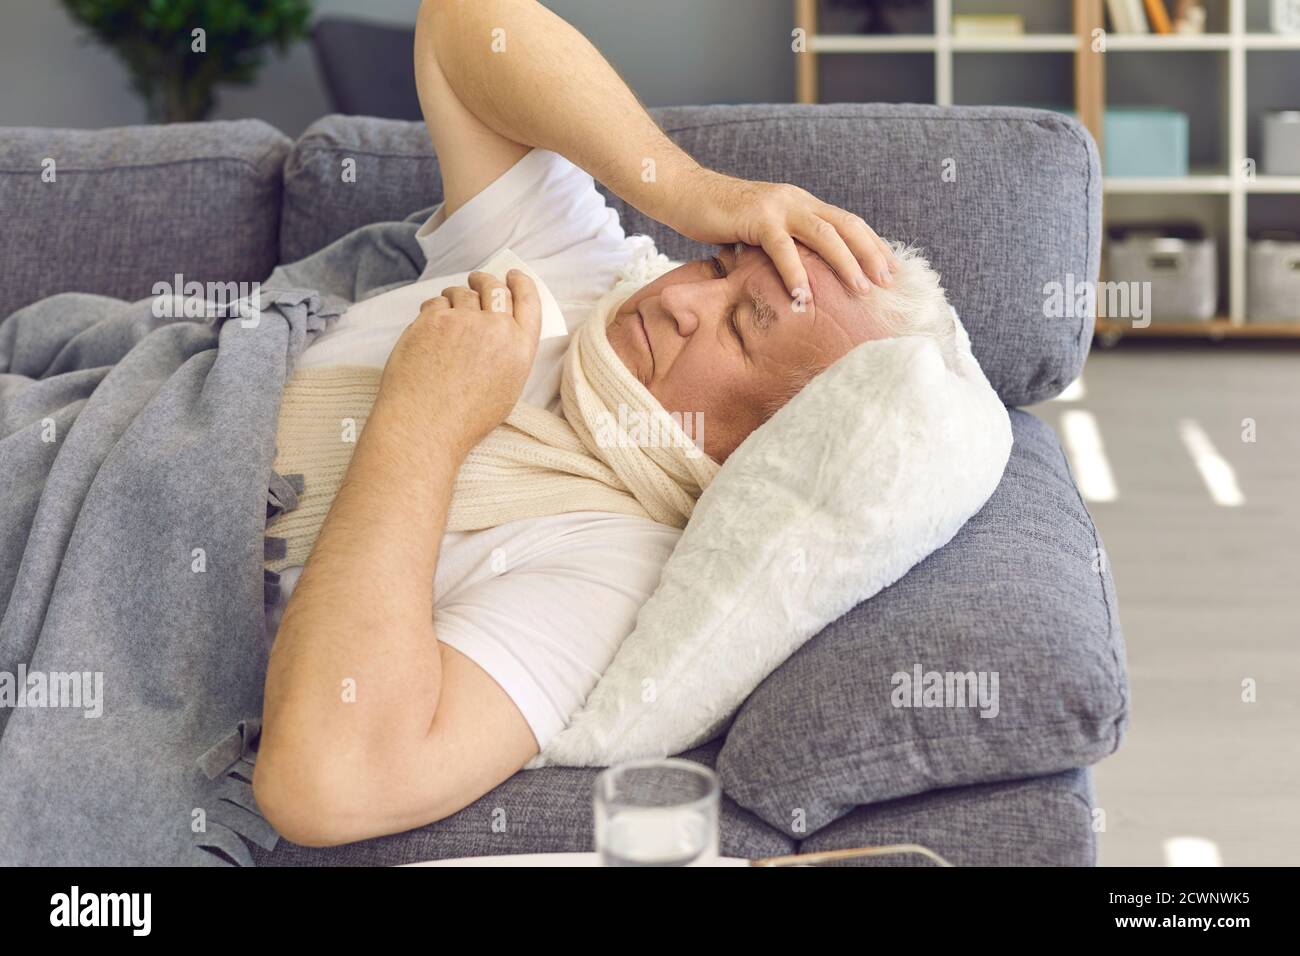 Sick senior man suffering from bad cold, flu or covid fever, coughing and having runny nose Stock Photo